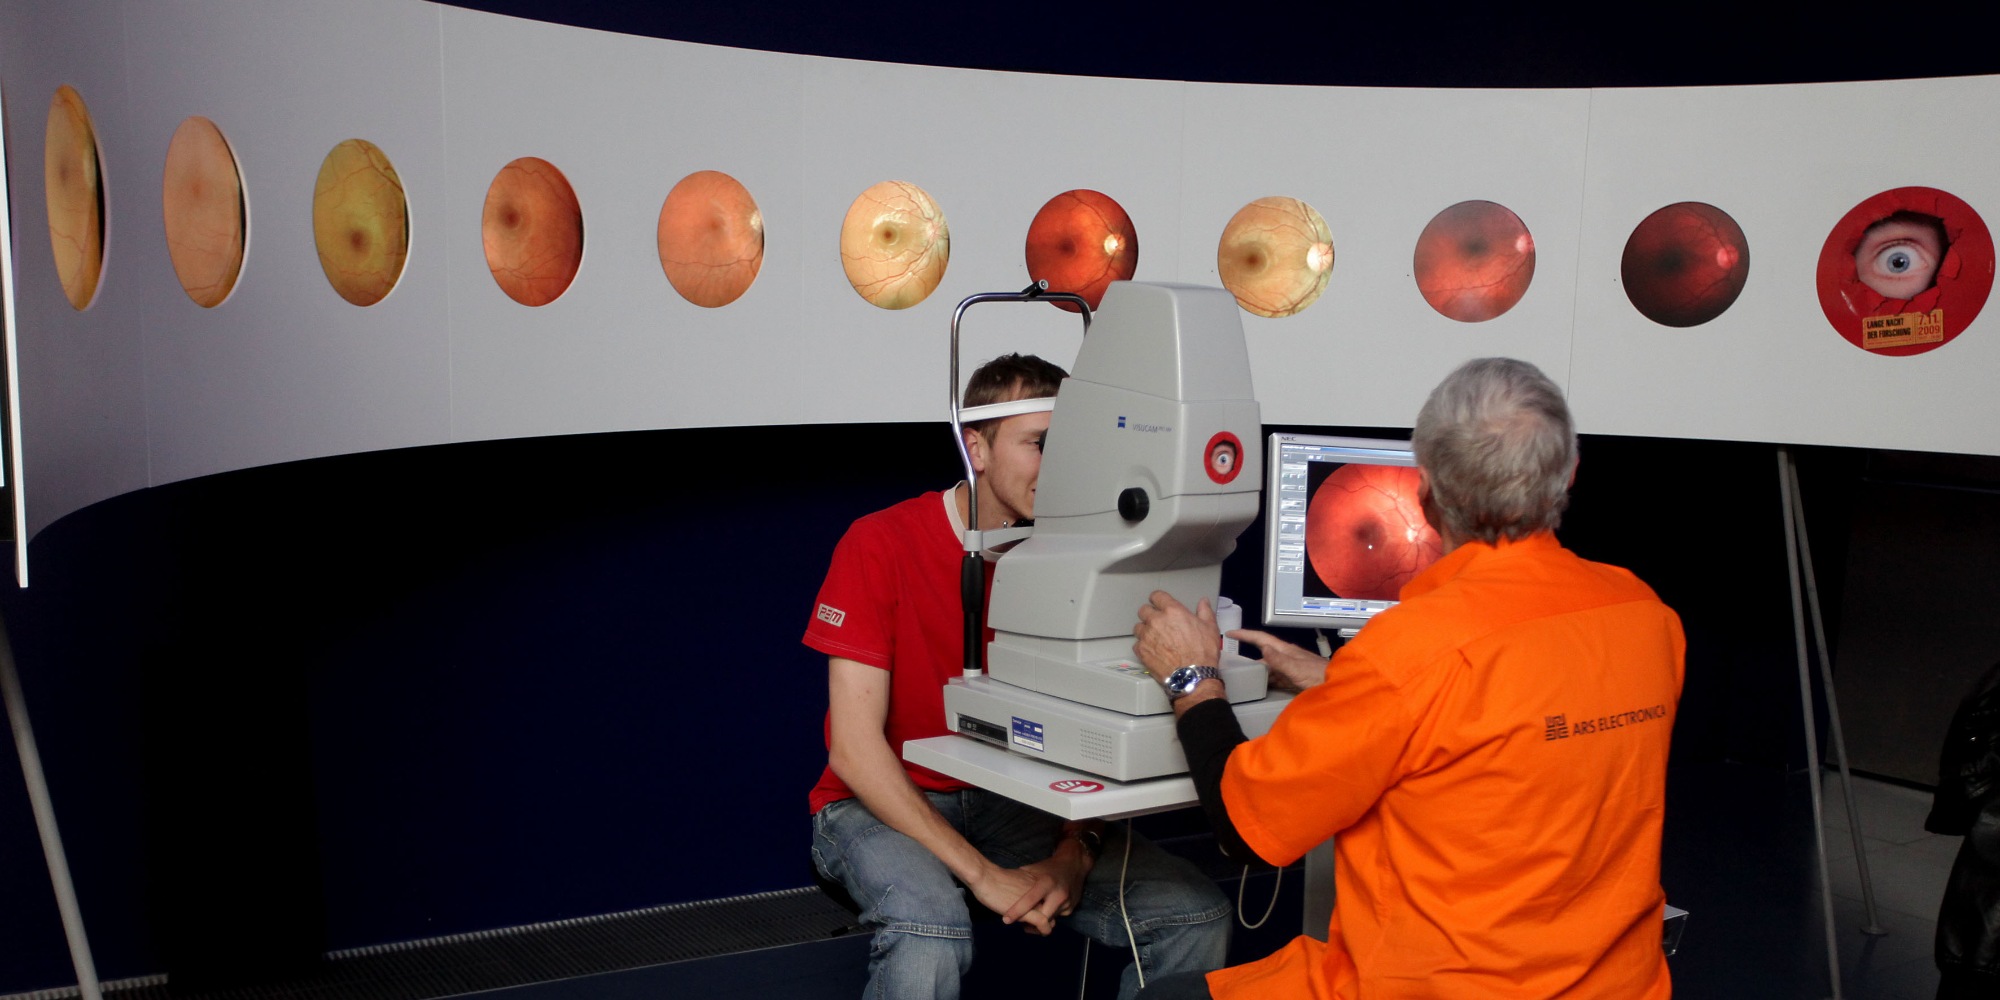 BrainLab at the Ars Electronica Center